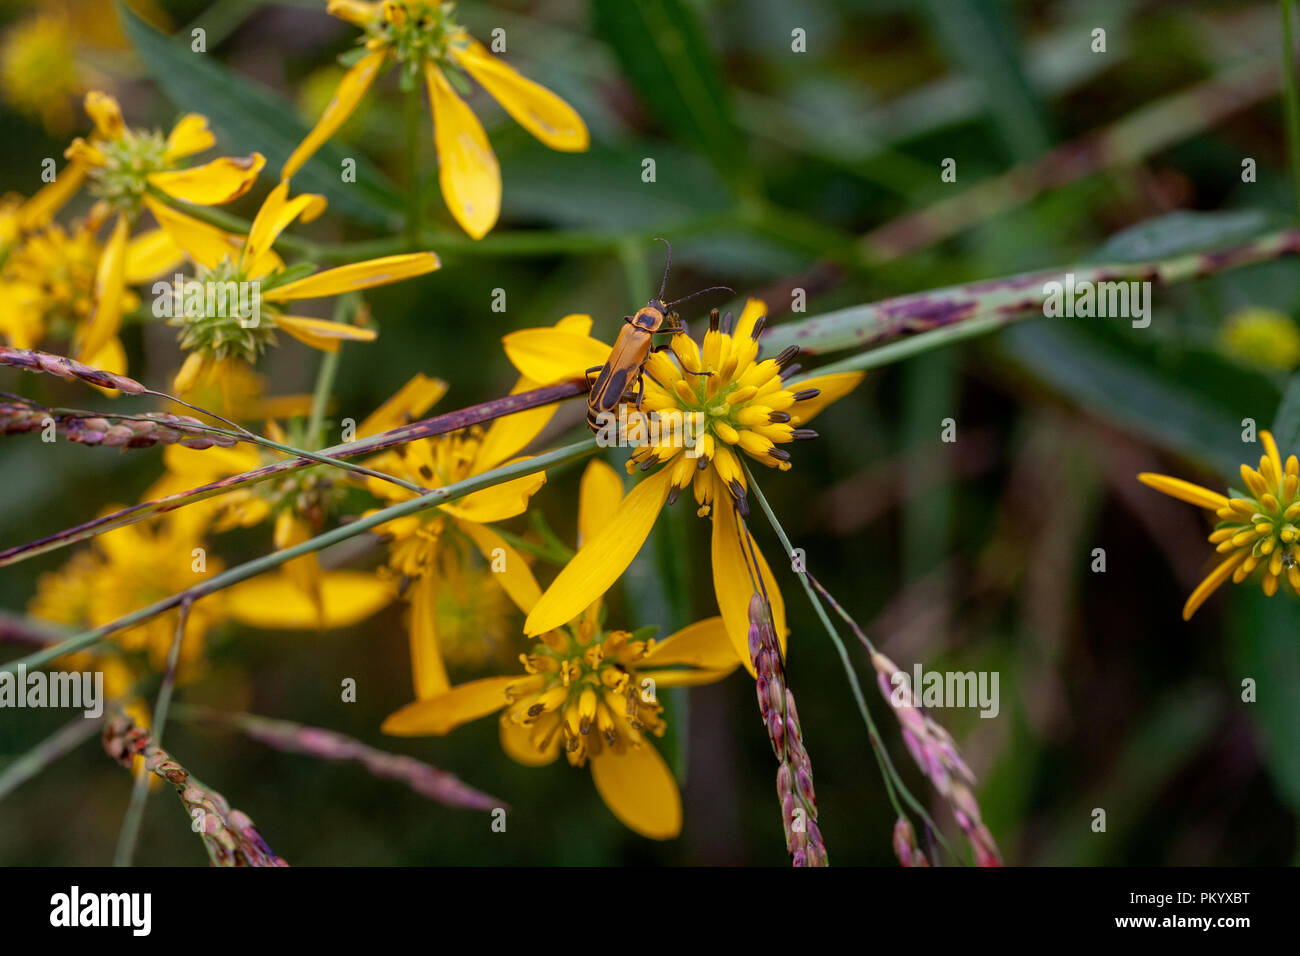 A close-up image of a Goldenrod soldier beetle on a native Tennessee yellow ironweed flower in a hay field near Knoxville. Stock Photo